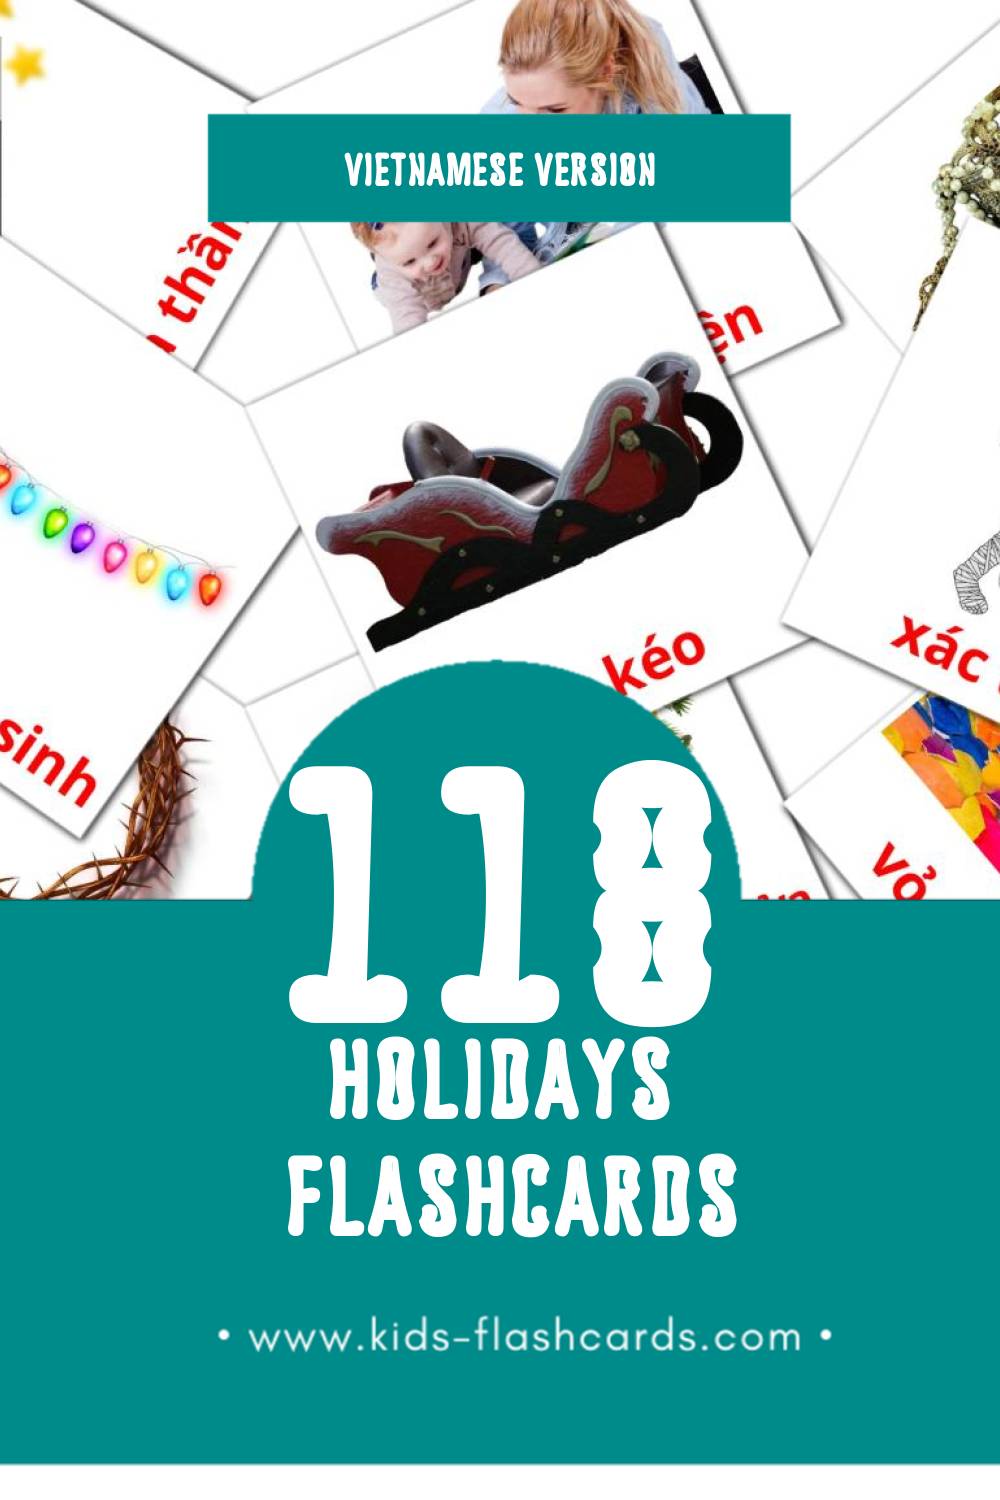 Visual Ngày nghỉ Flashcards for Toddlers (93 cards in Vietnamese)